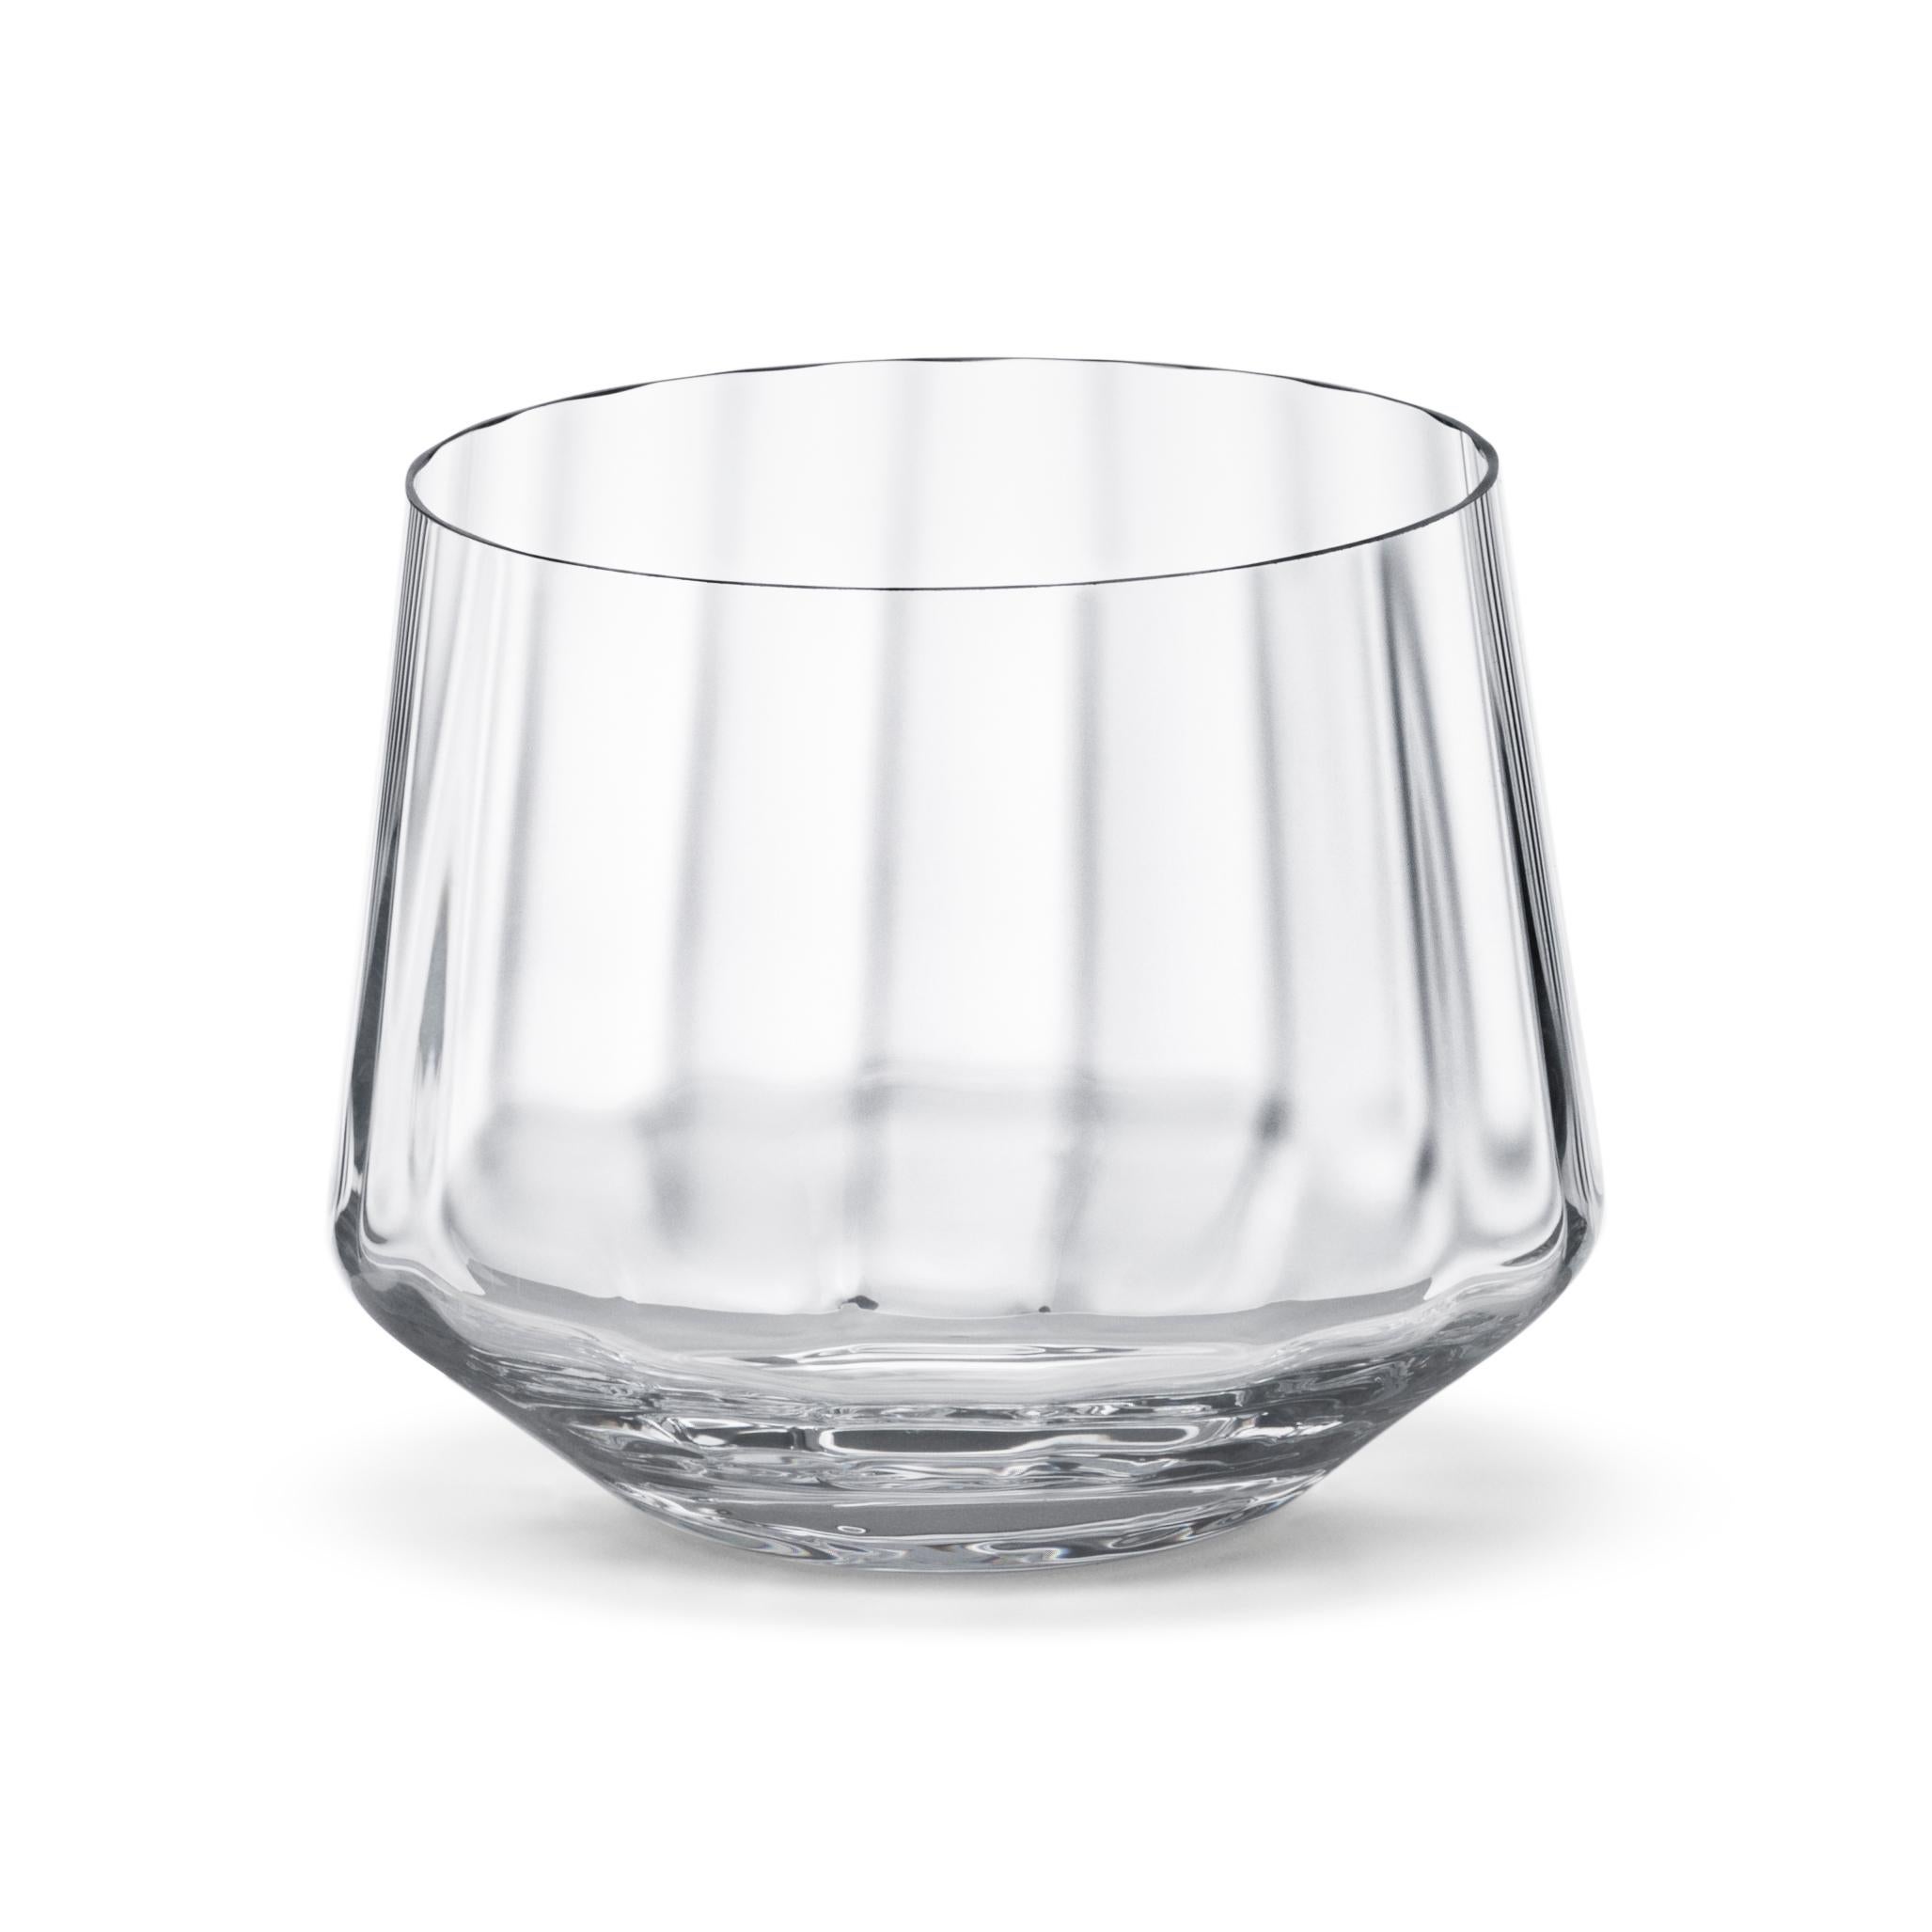 Eye-catching and stylish, this set of six lead-free crystal tumblers brings the Scandinavian design to your table setting. The gentle grooves that echo the details in early Art Deco silverware not only add visual interest but also allow the glasses